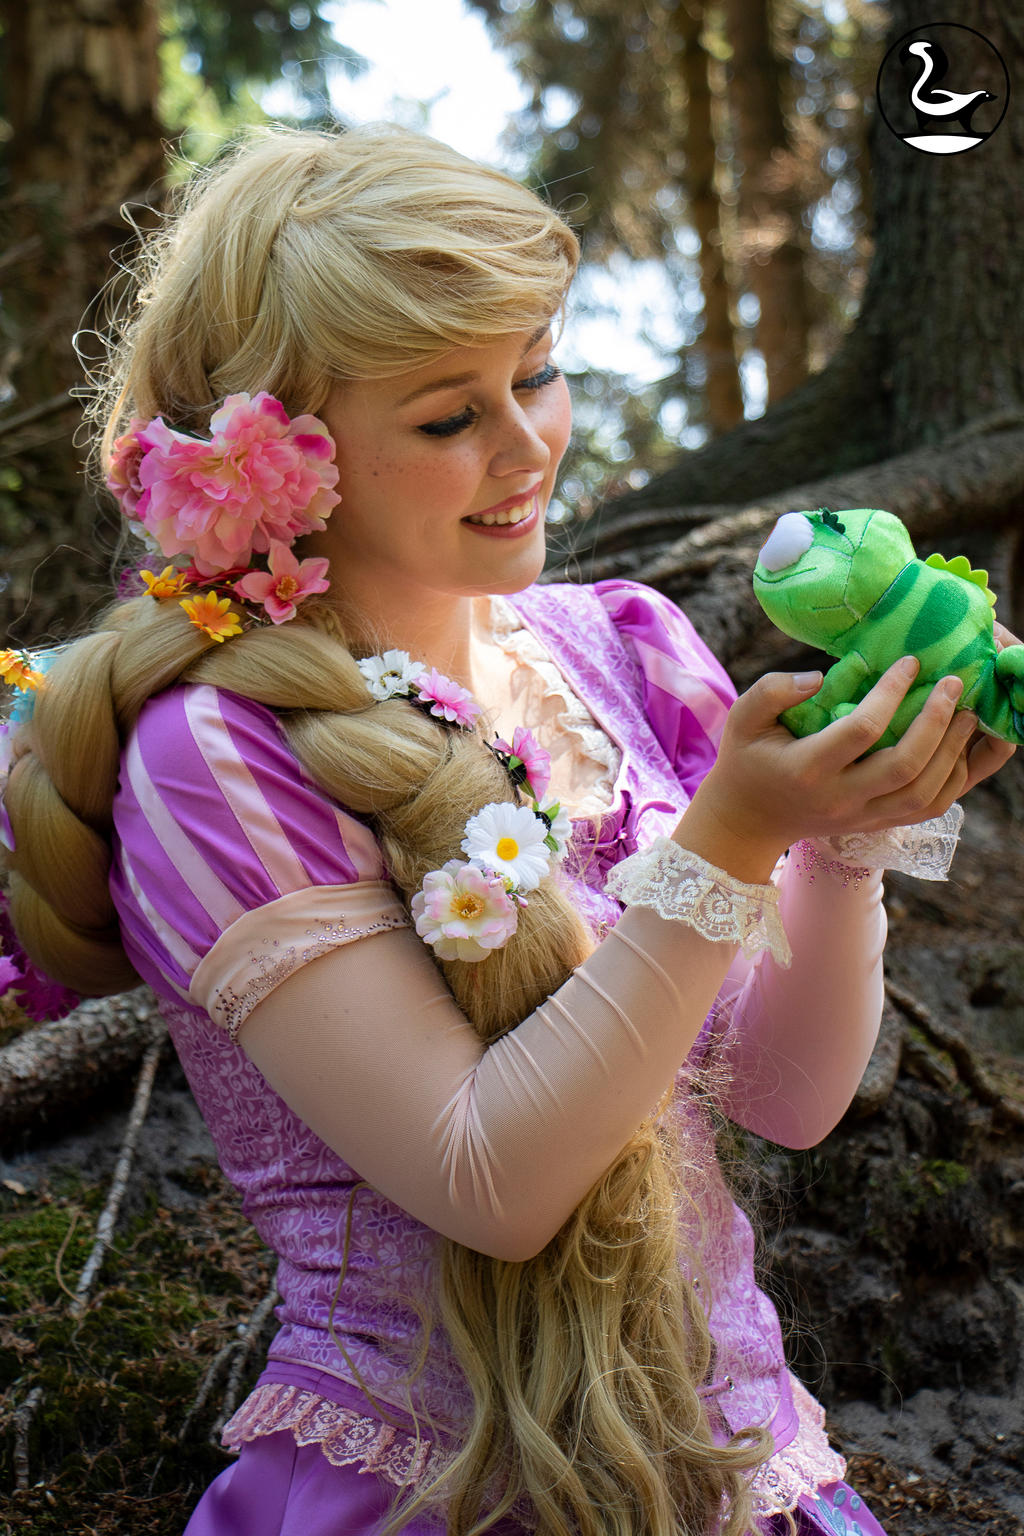 Rapunzel and Pascal - Tangled by AdiaCosplay on DeviantArt